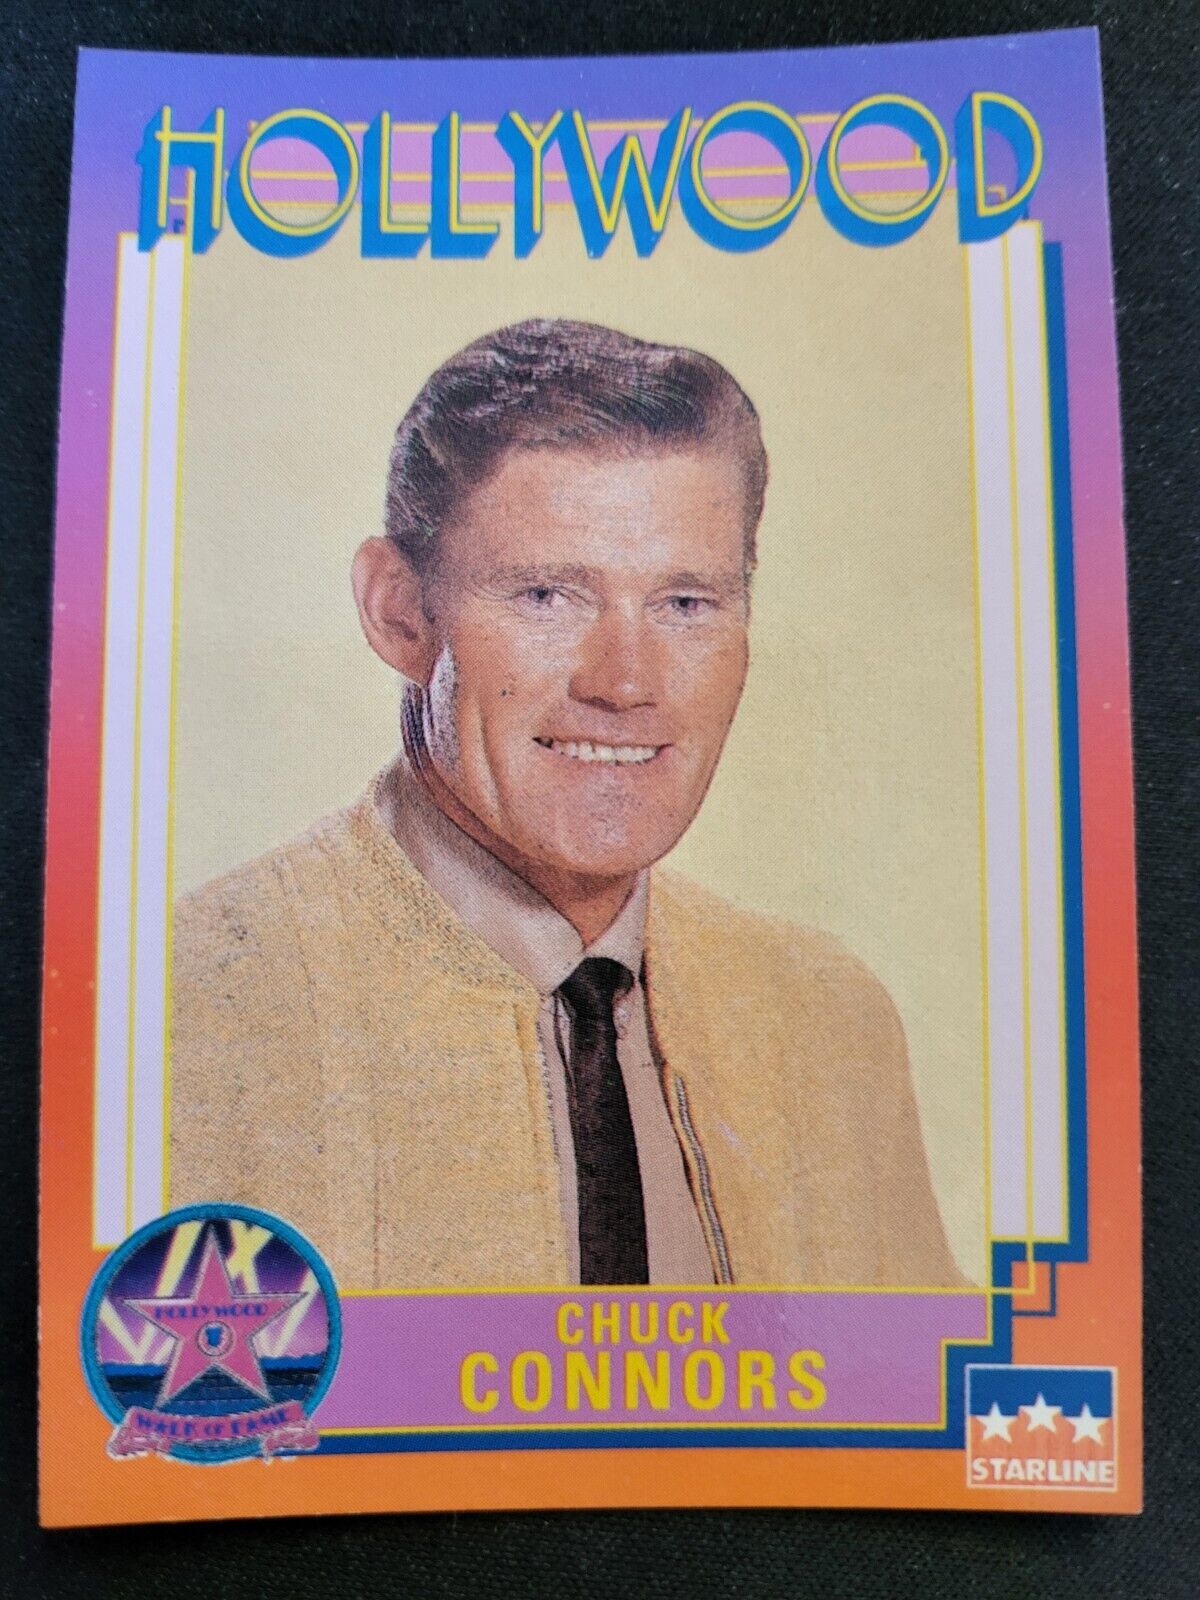 1991 Starline Chuck Connors Hollywood Walk Of Fame Trading Card 75